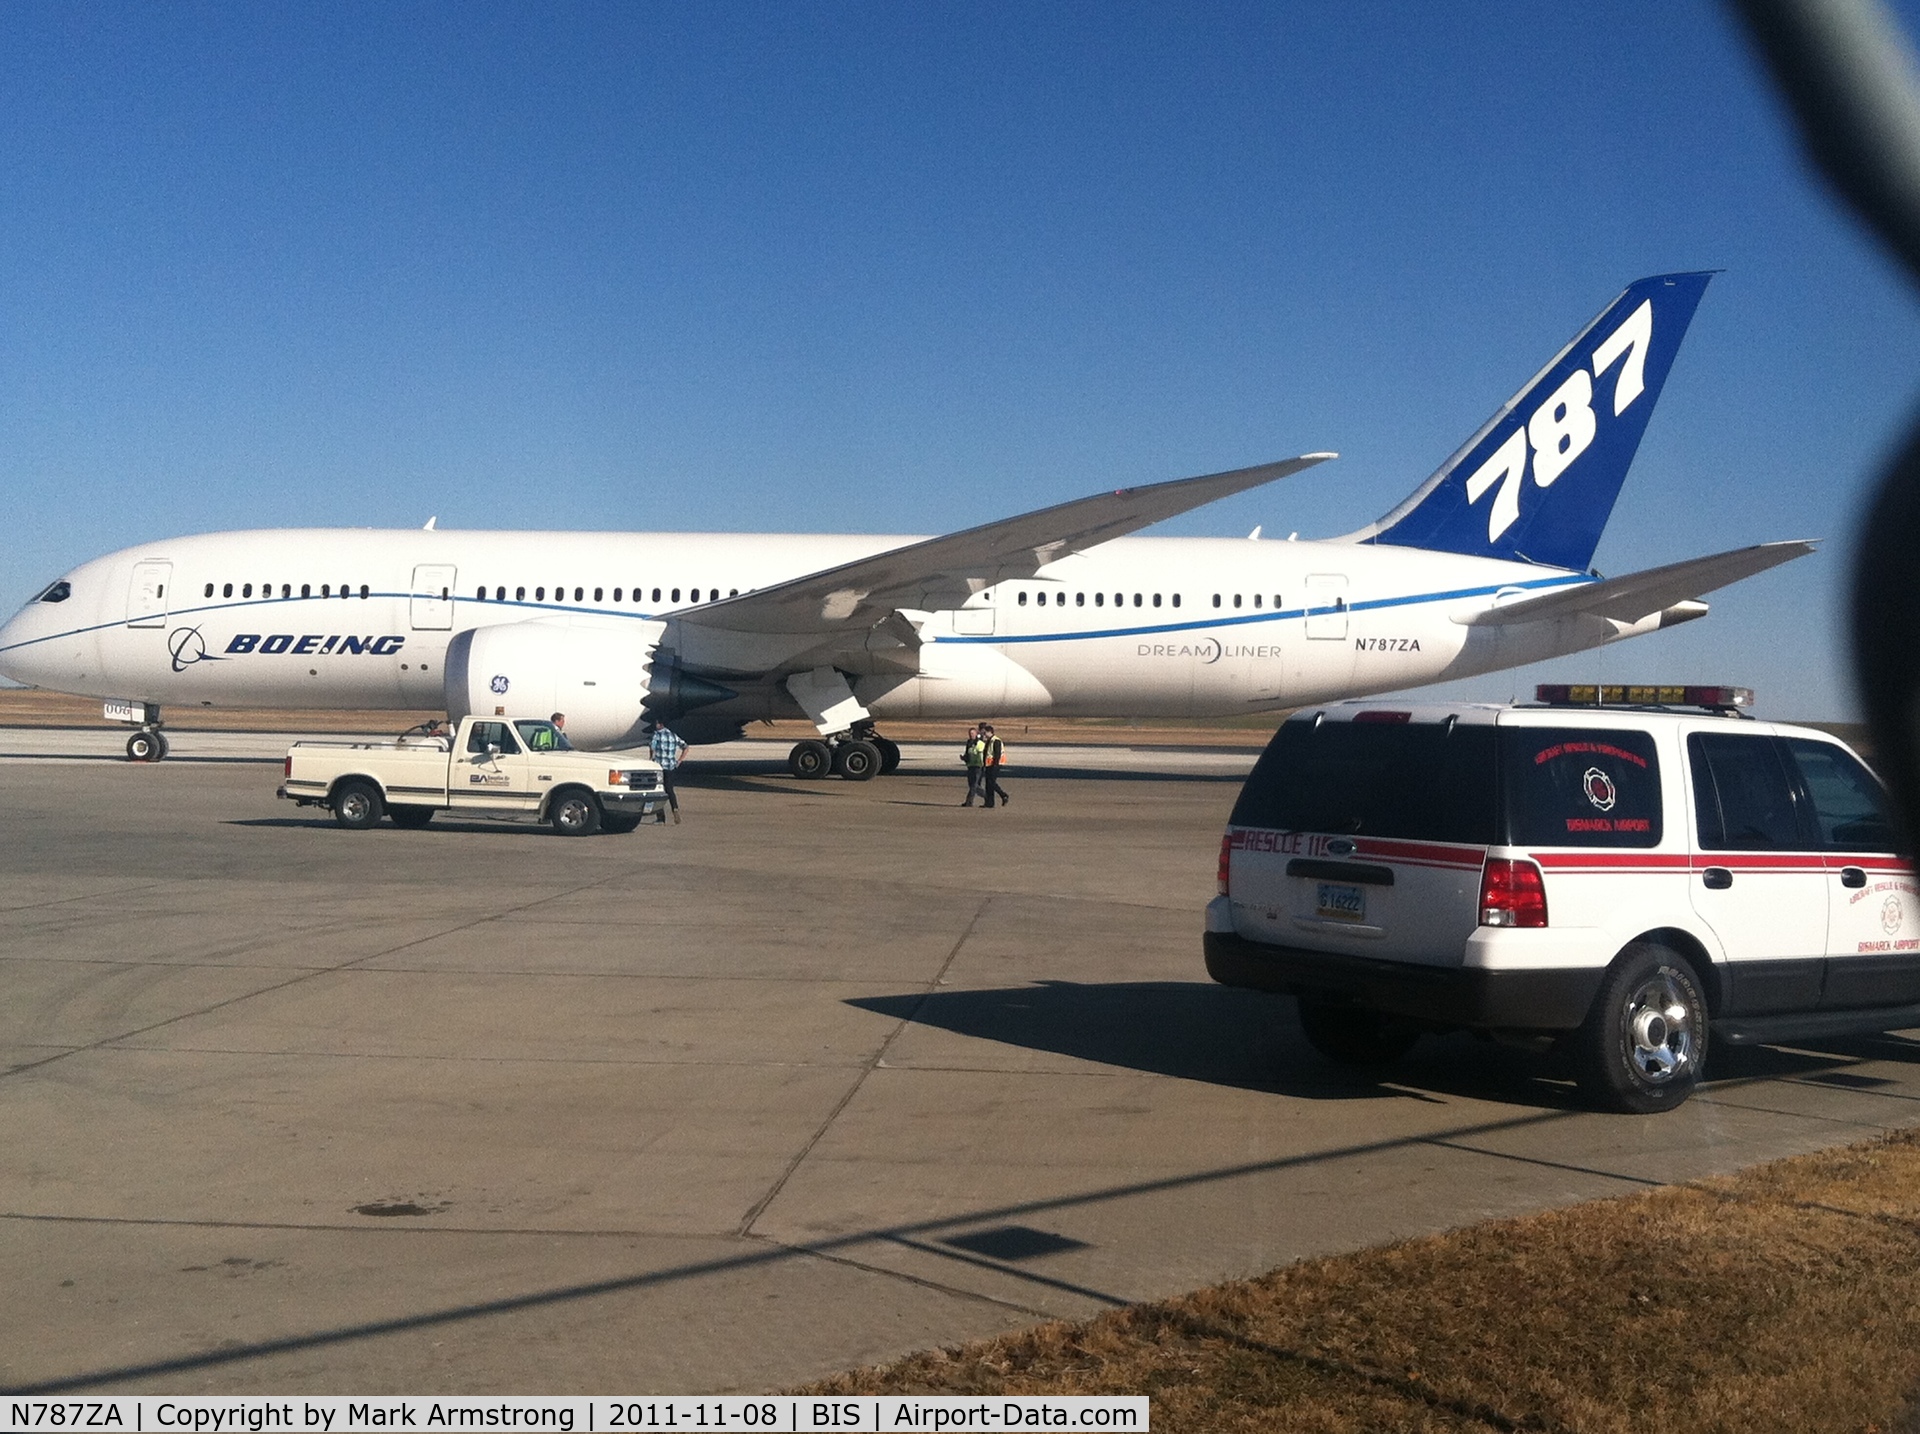 N787ZA, 2009 Boeing 787-8 Dreamliner C/N 40695, This plane landed for the first time in Bismarcj, ND on 11/8/2009